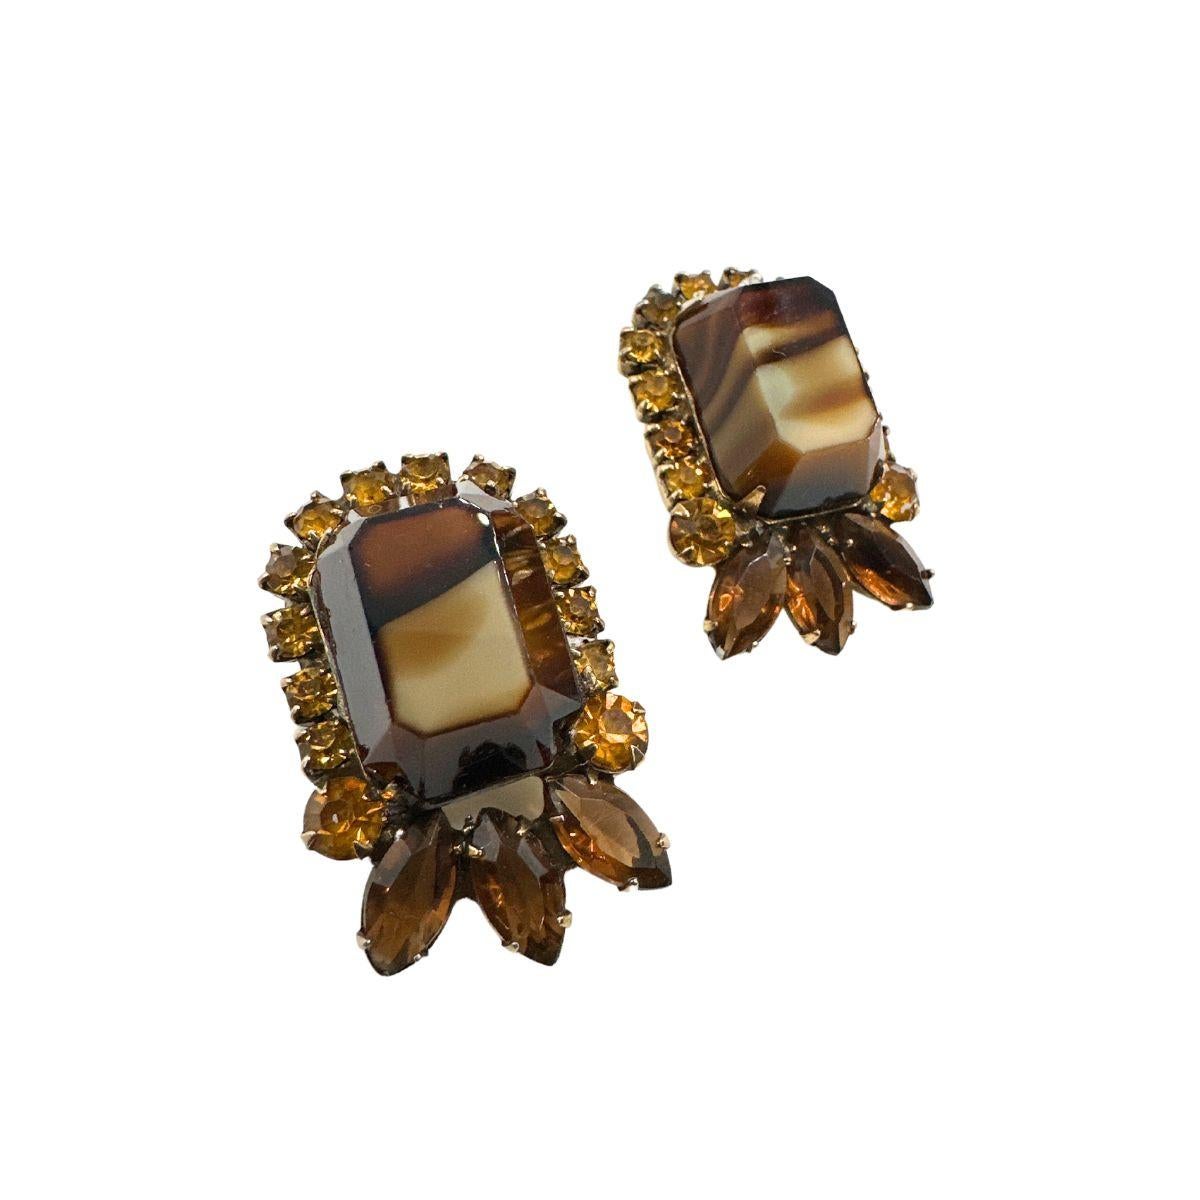 Introduce a touch of vintage glamour to your ensemble with these Vintage Marble Brown Glass and Champagne Color Rhinestone Clip-On Earrings. This exquisite pair combines the rich tones of marble brown glass with the subtle sparkle of